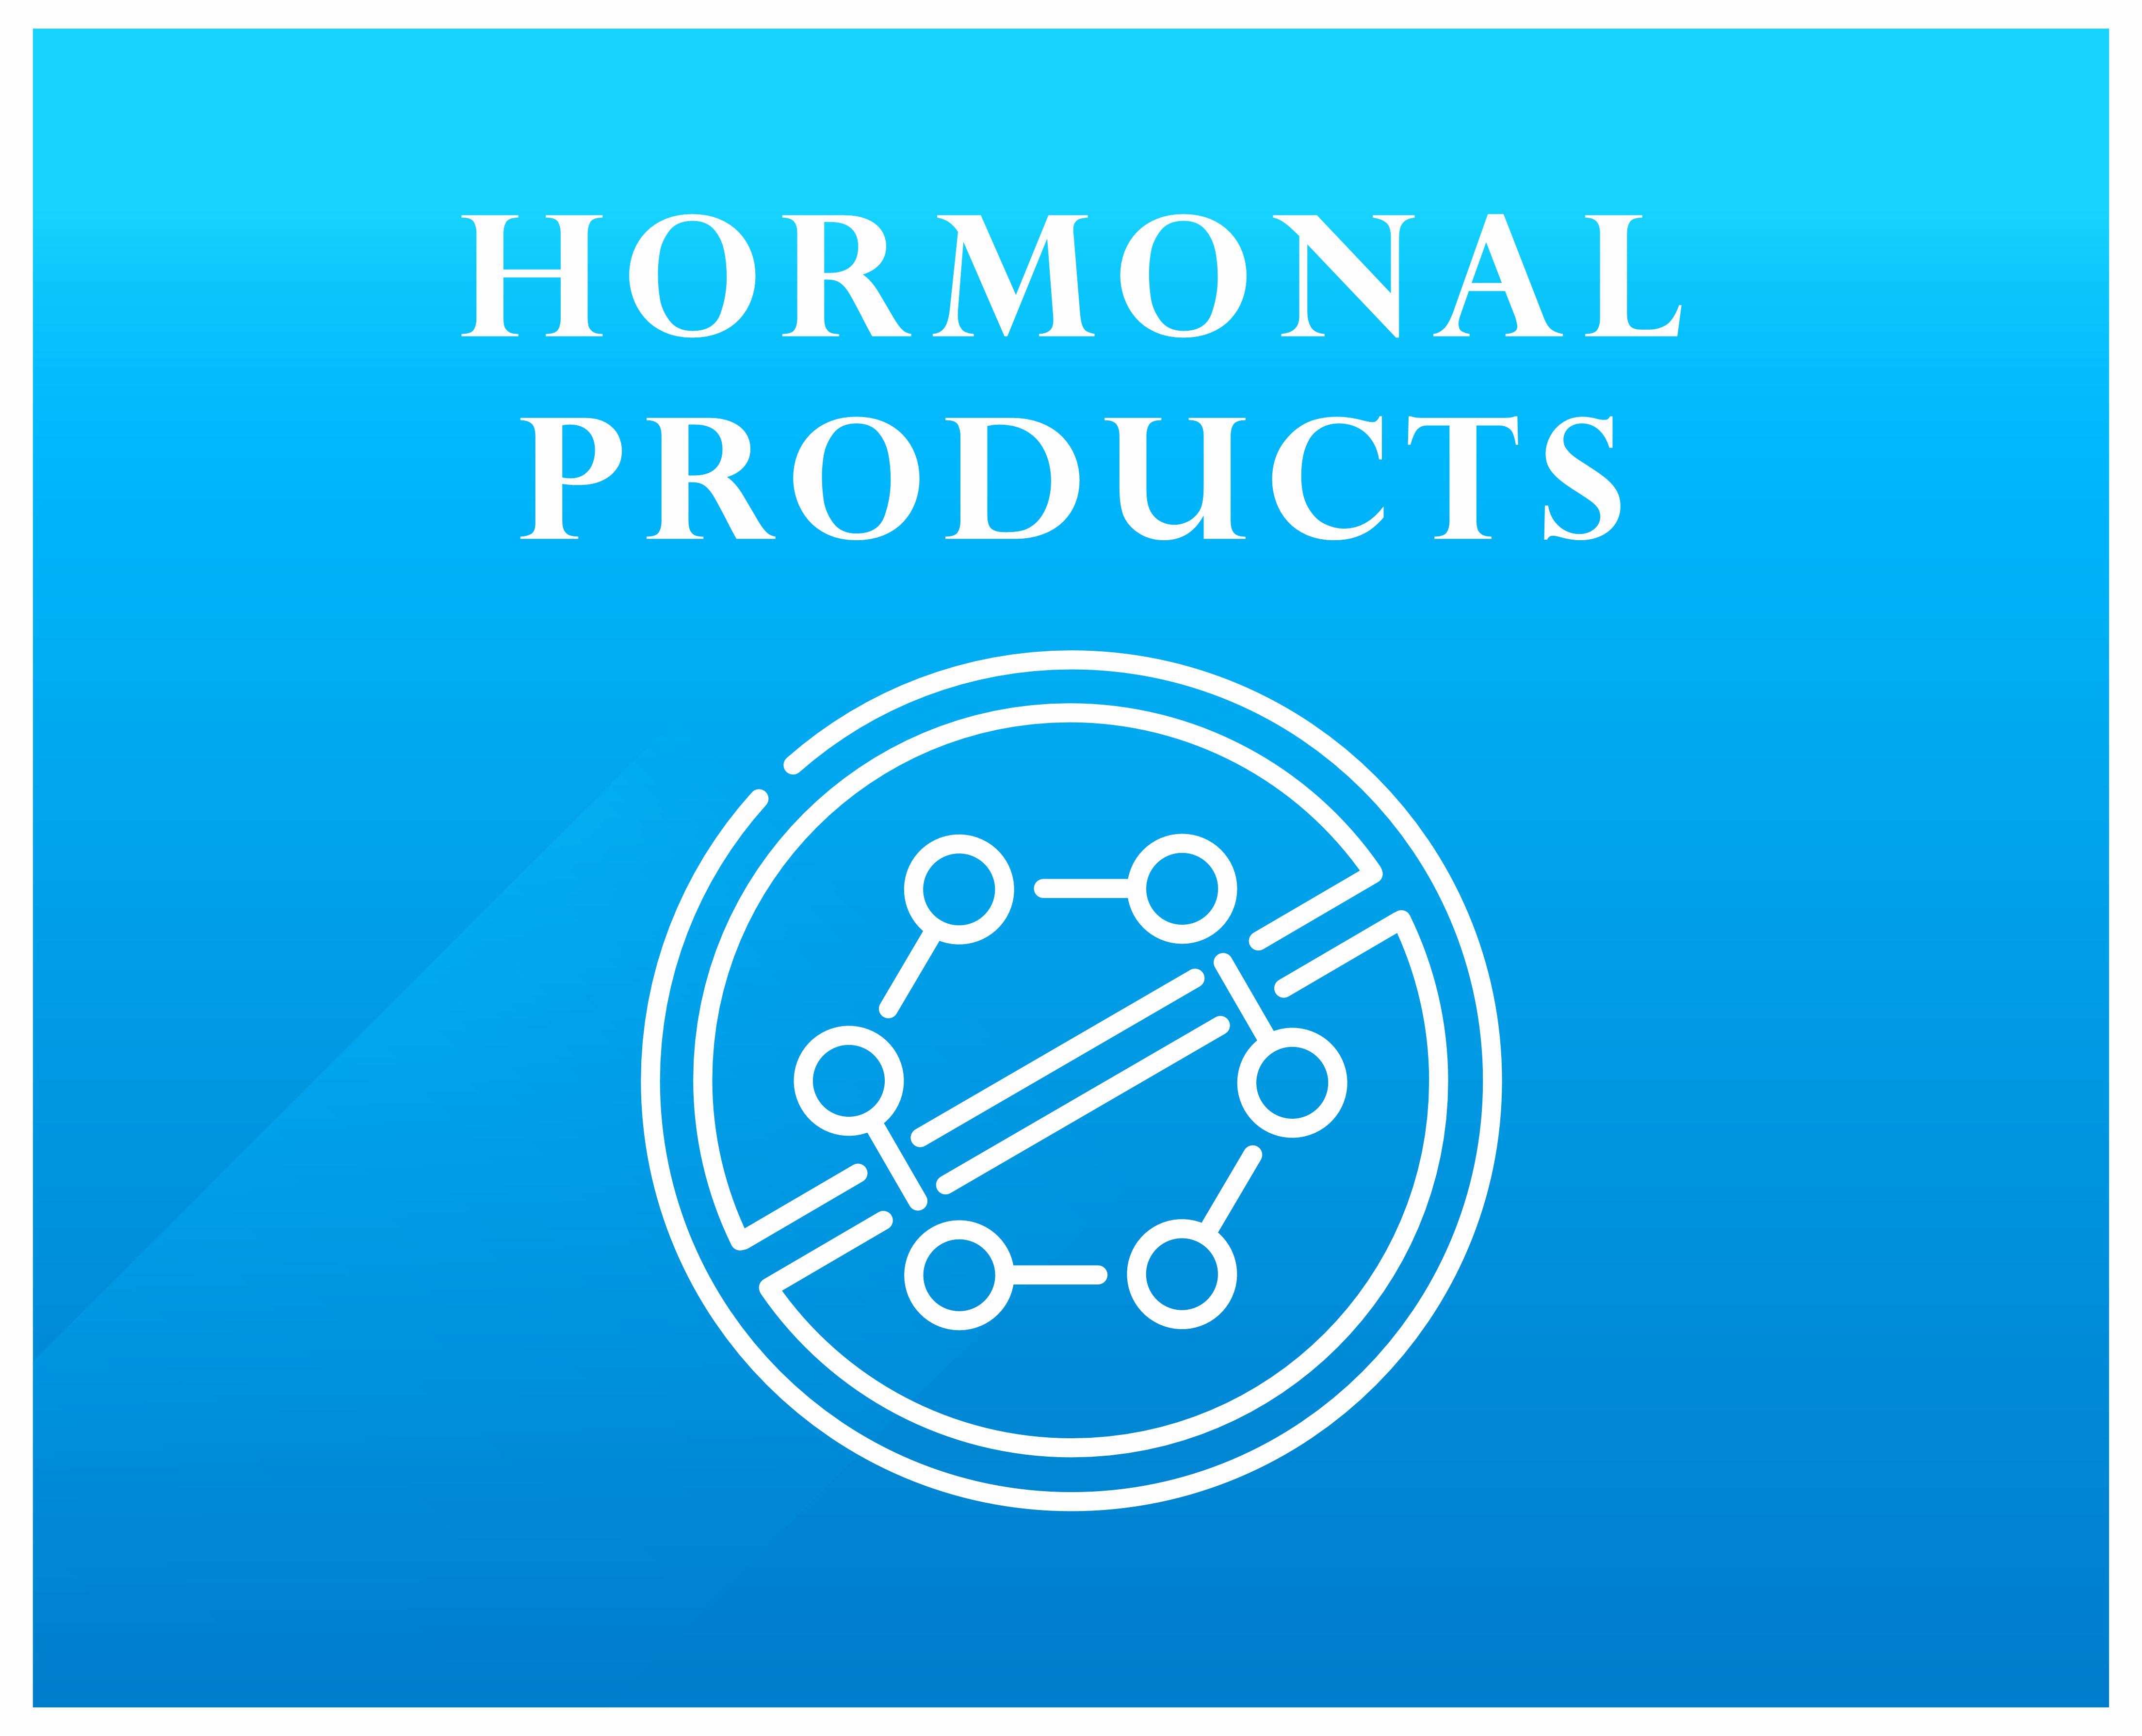 Hormonal Products